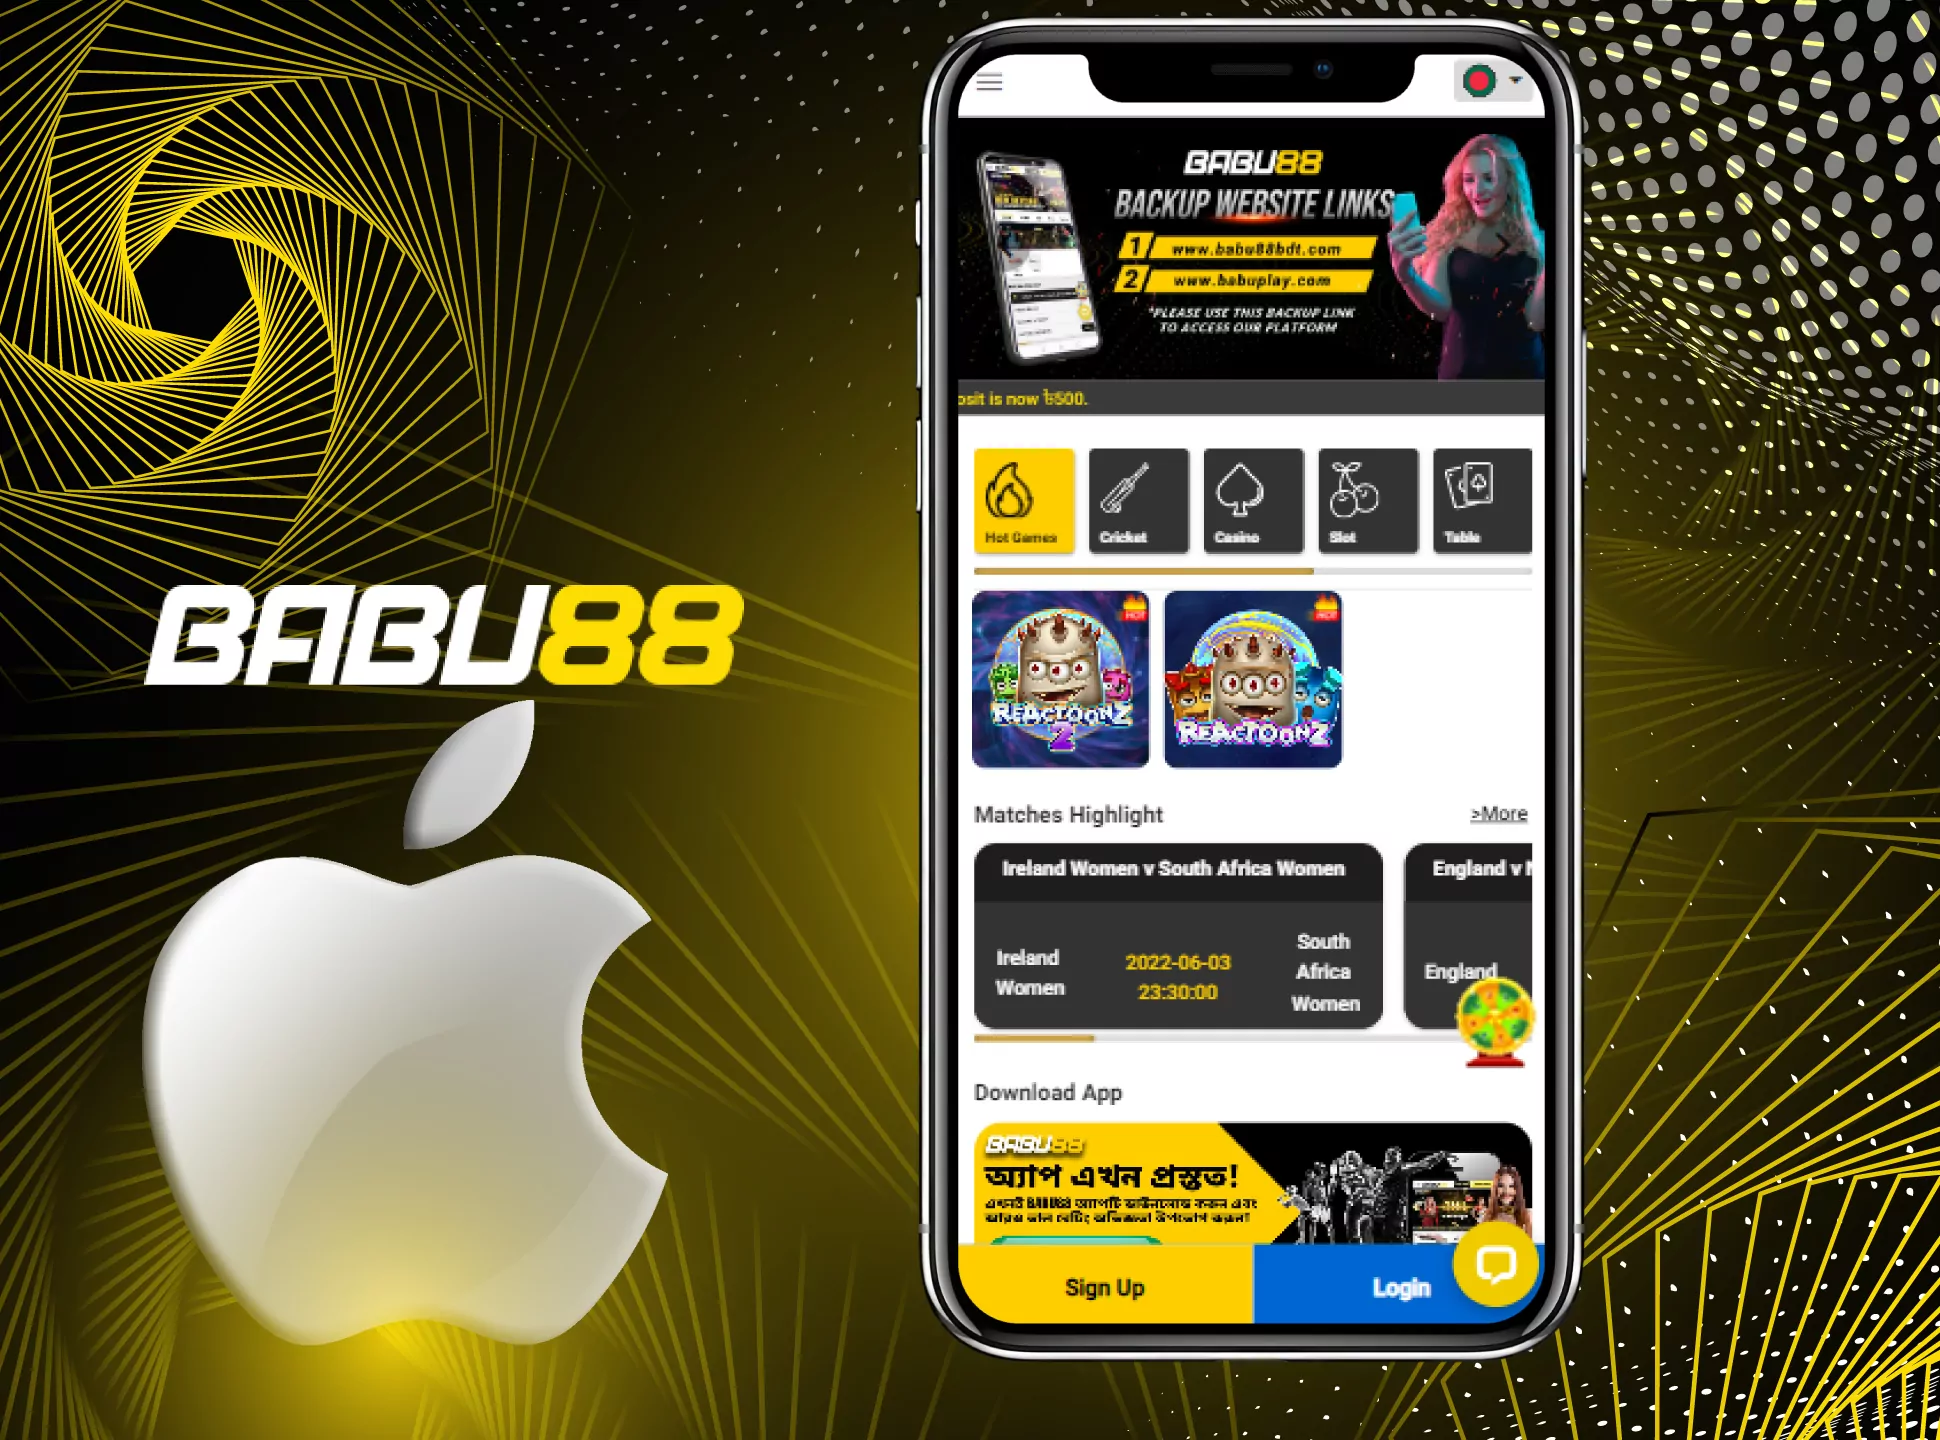 You can use the mobile version of the Babu88 website on your iPhone.